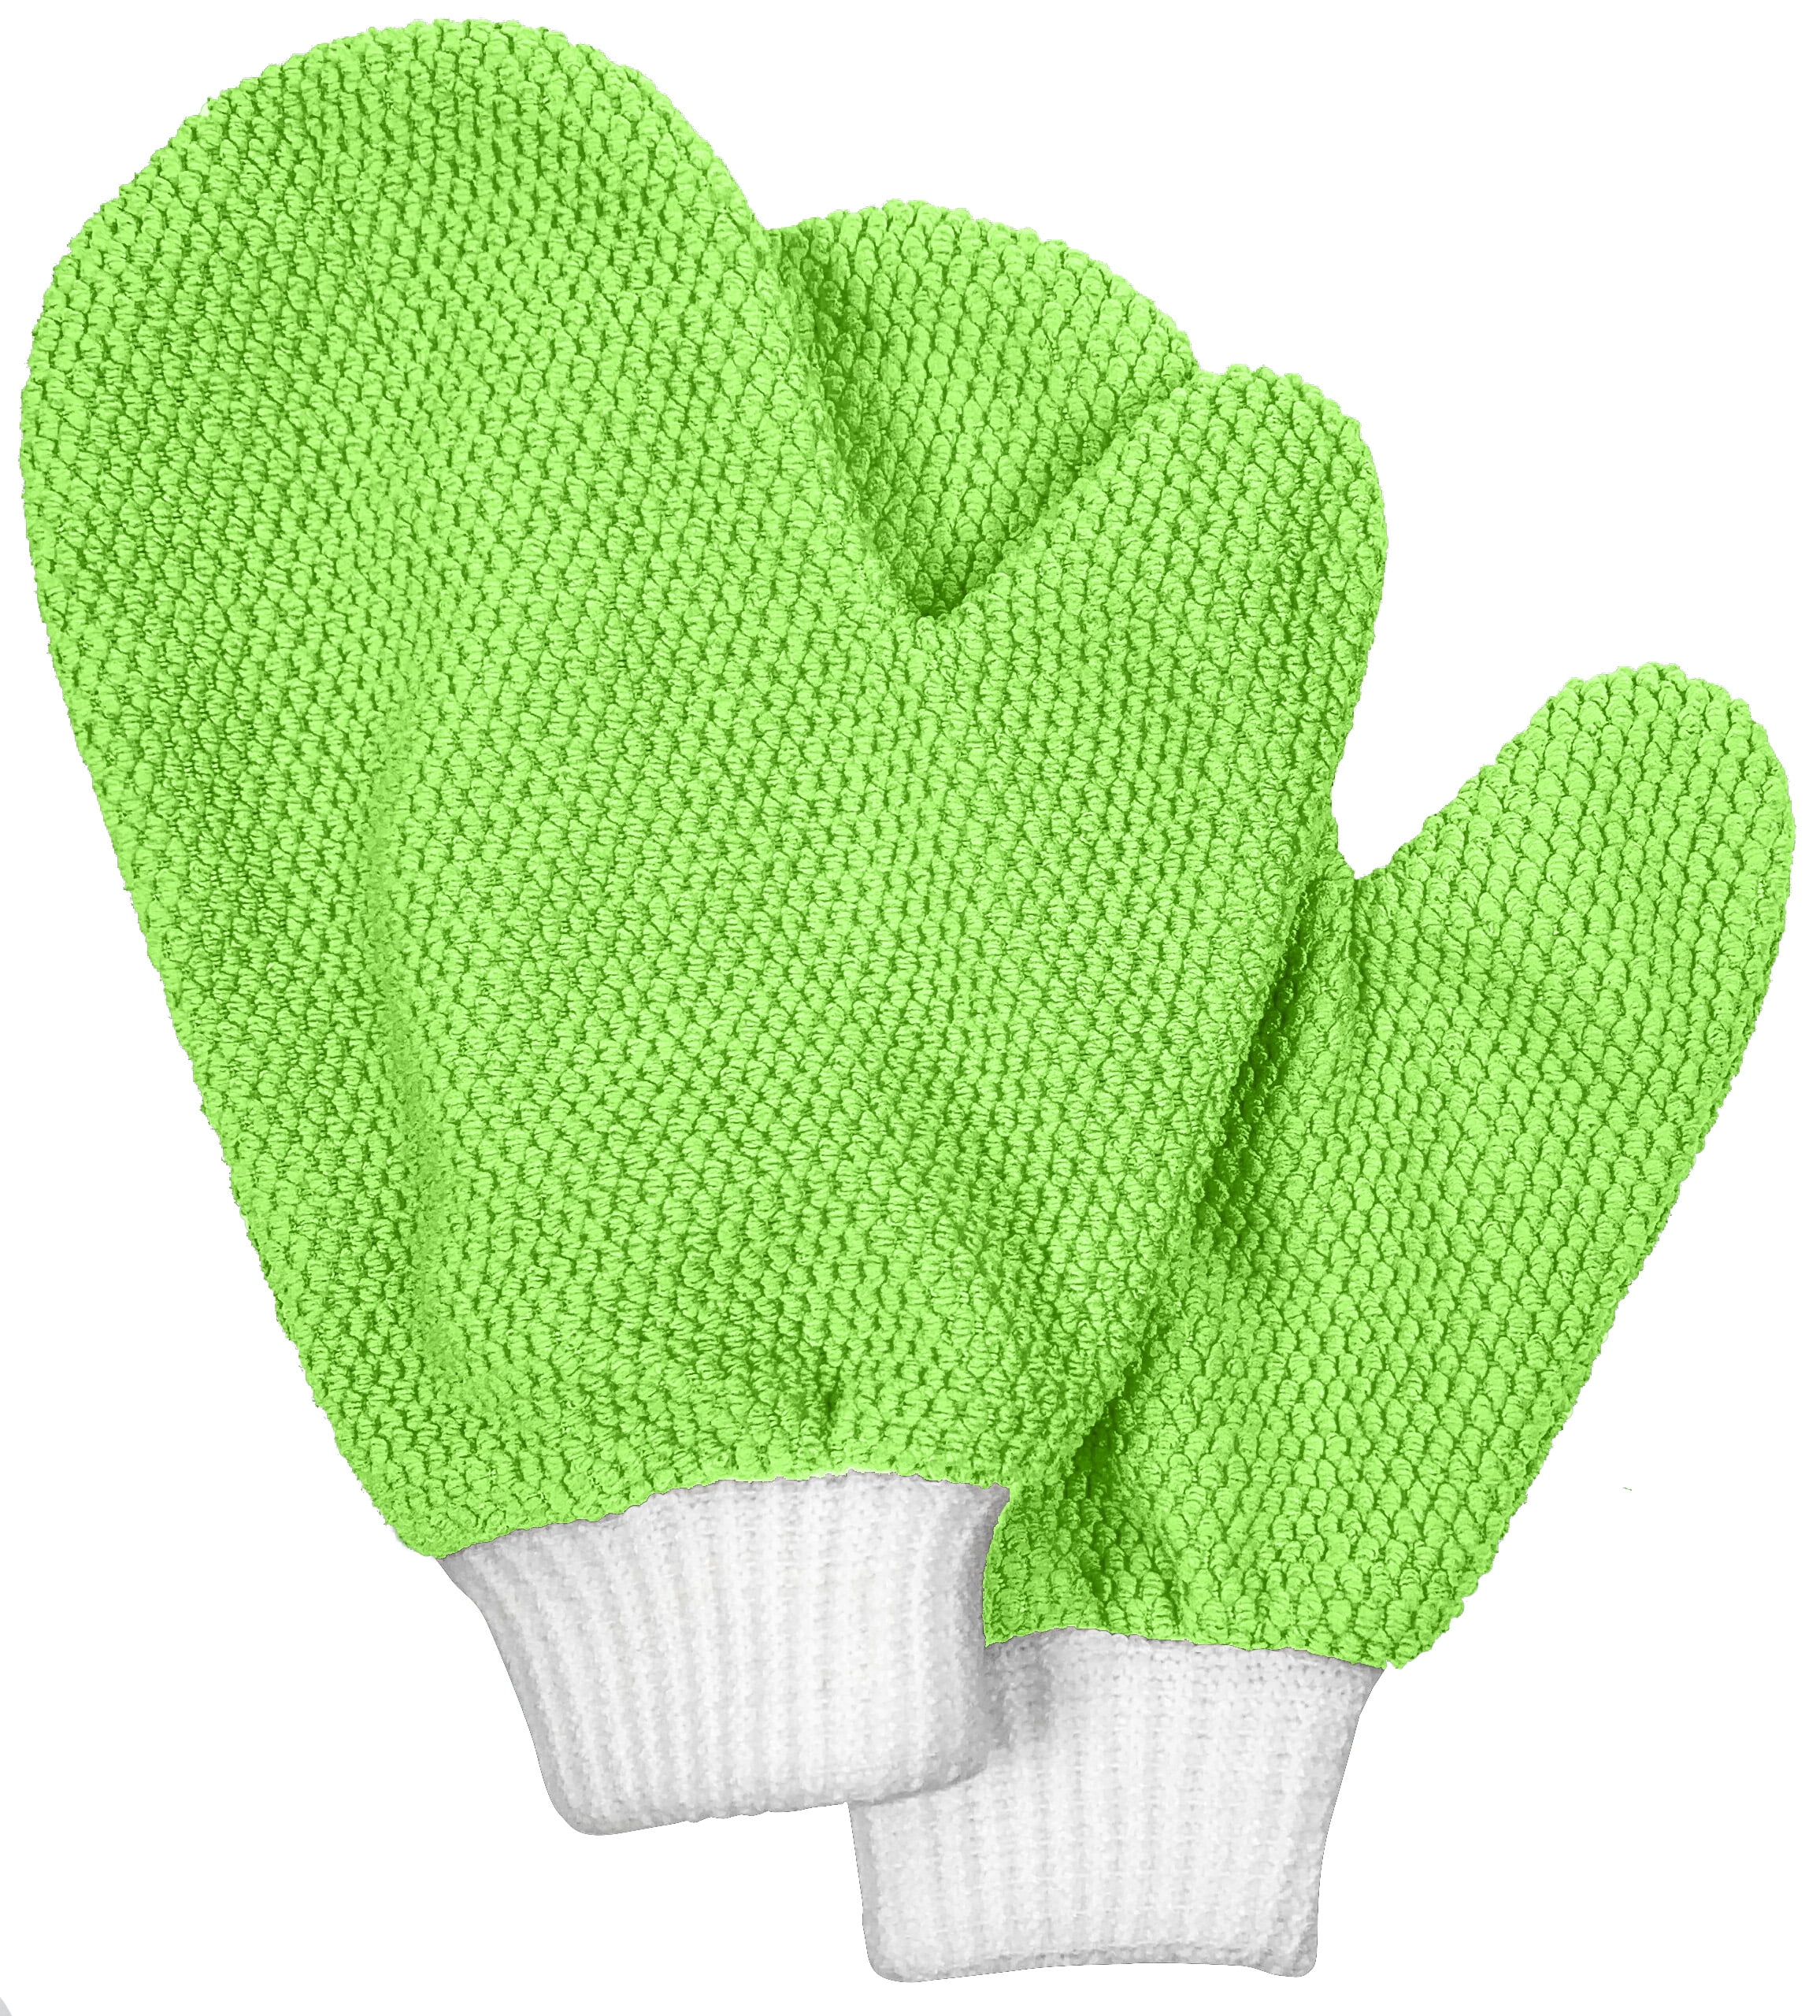 MIG4U Microfiber Dusting Gloves Washable Reusable Cleaning Mittens Gloves  Kitchen House Cleaning Car Blinds Multicolor 4 Pairs L/XL